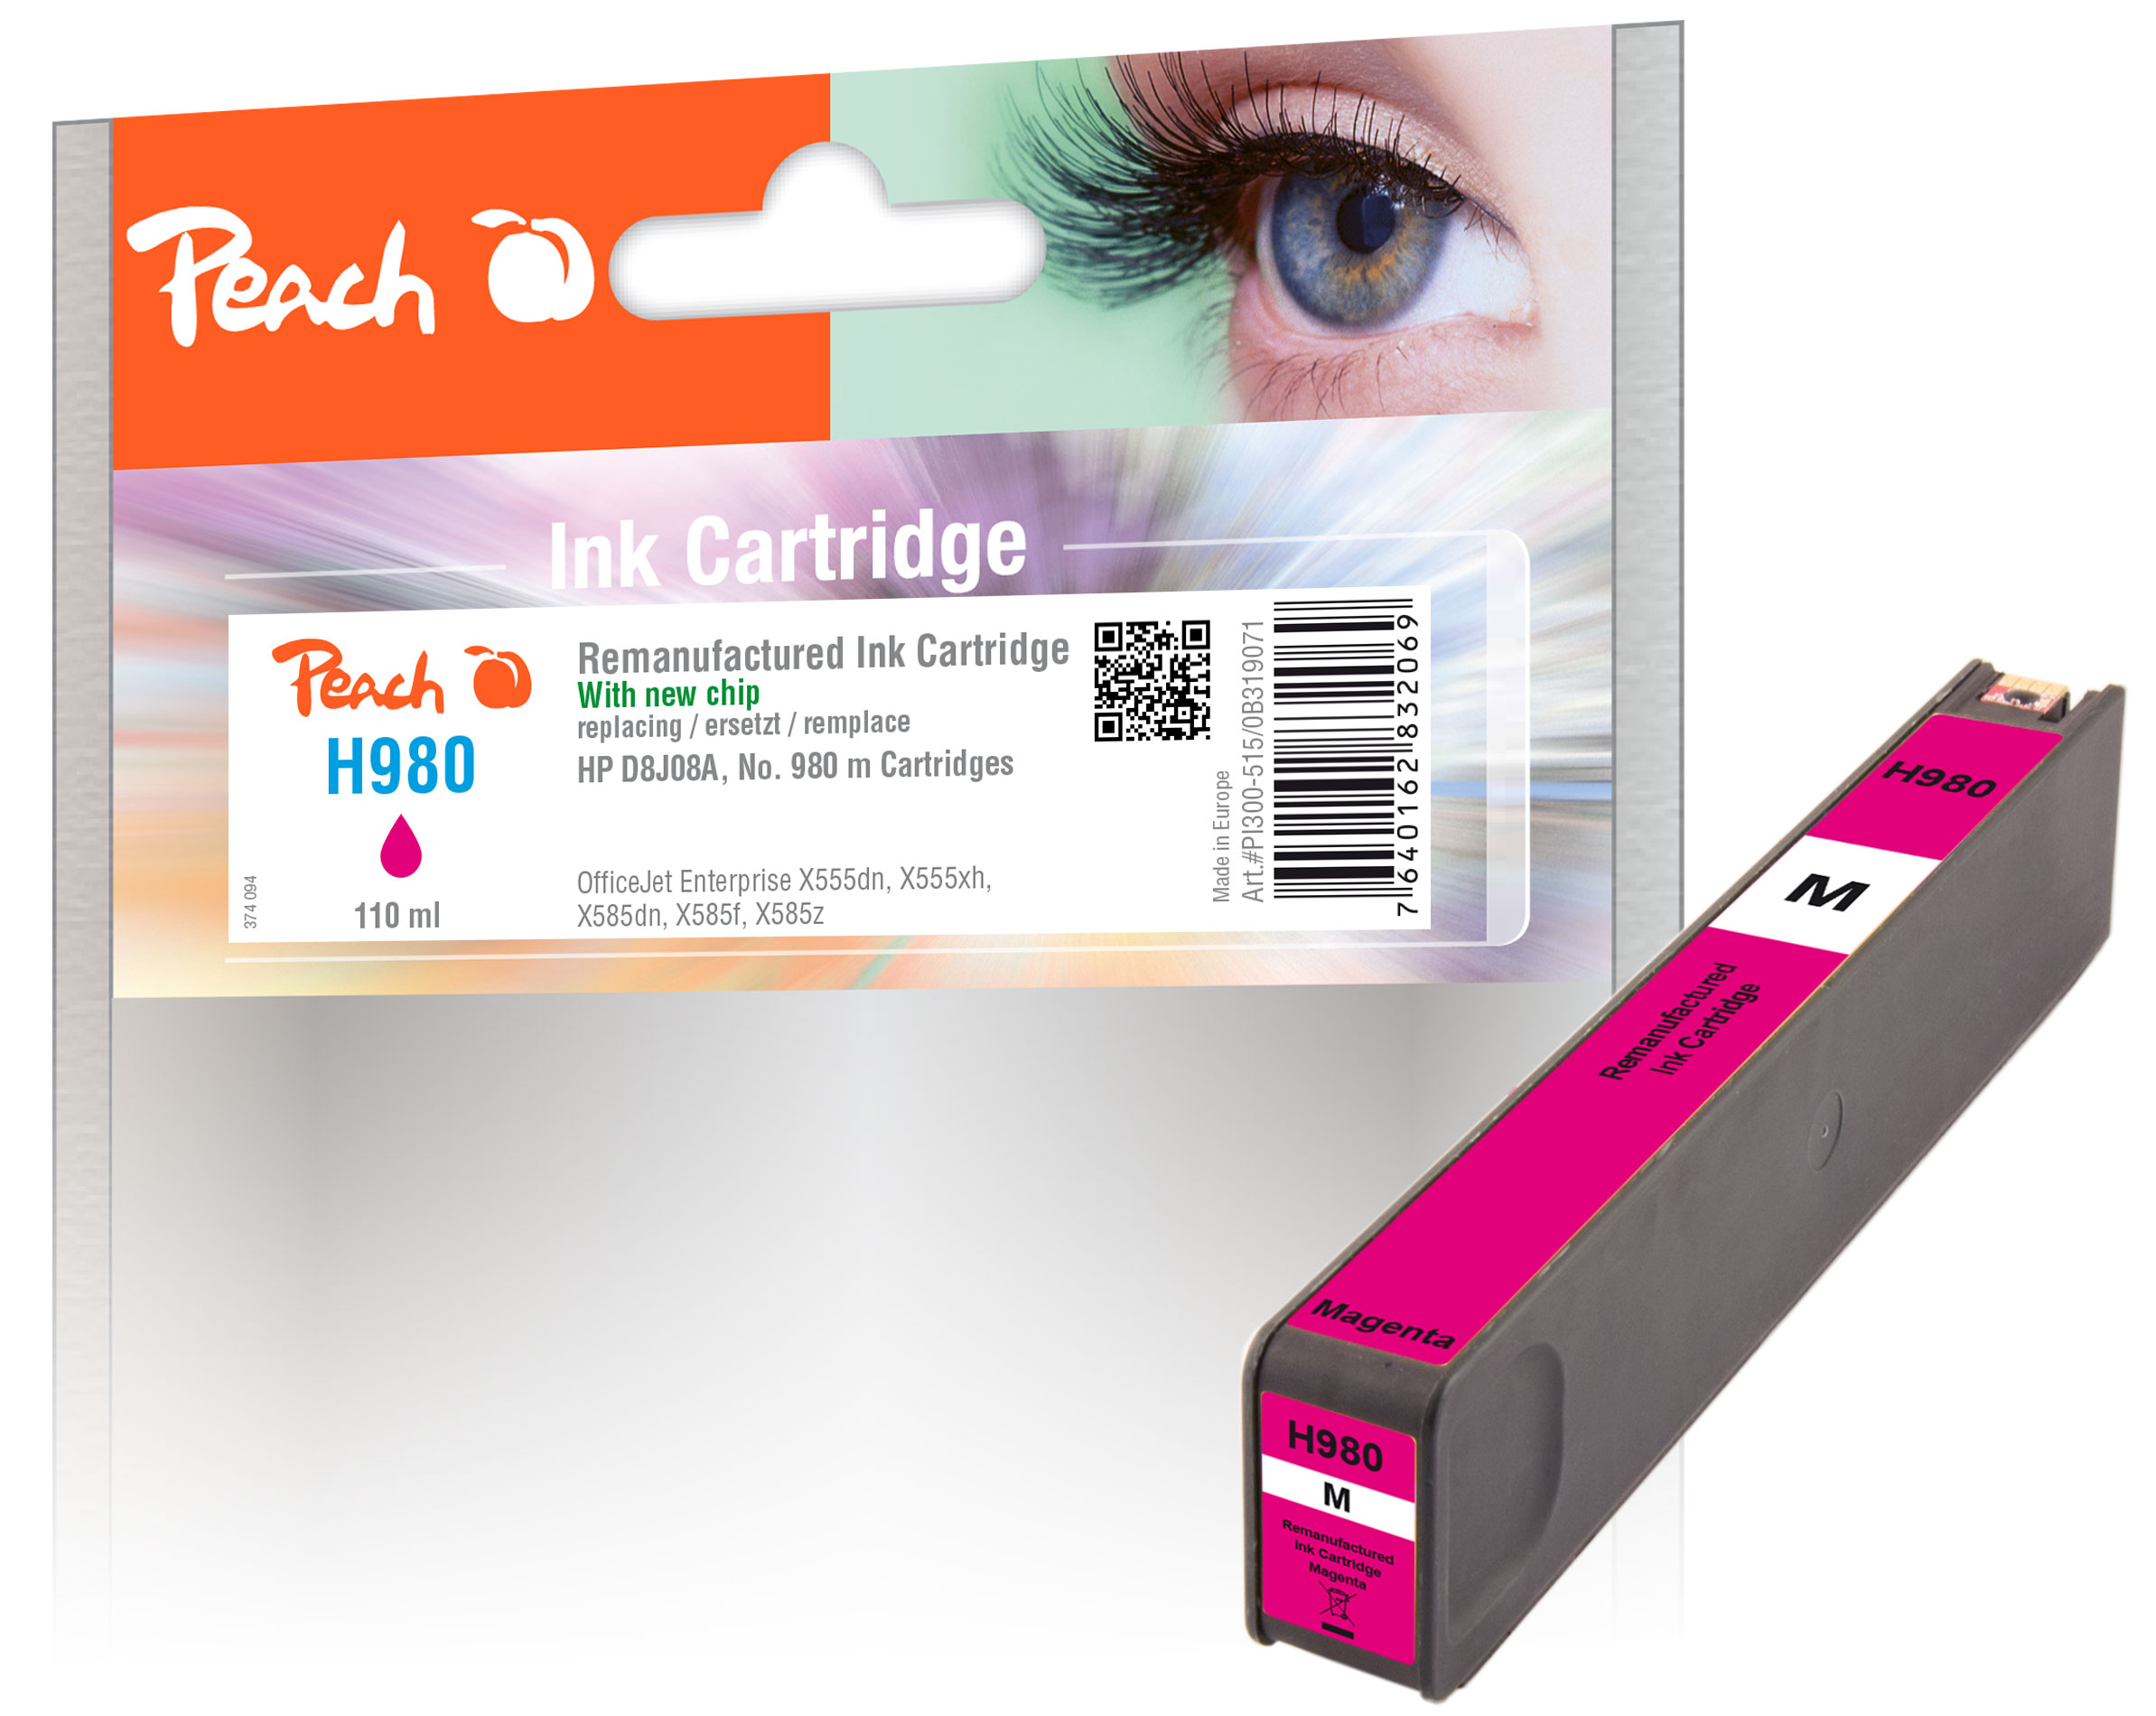 PI300-515 | Peach Ink Cartridge with chip magenta compatible with HP No 980, D8J08A, REM